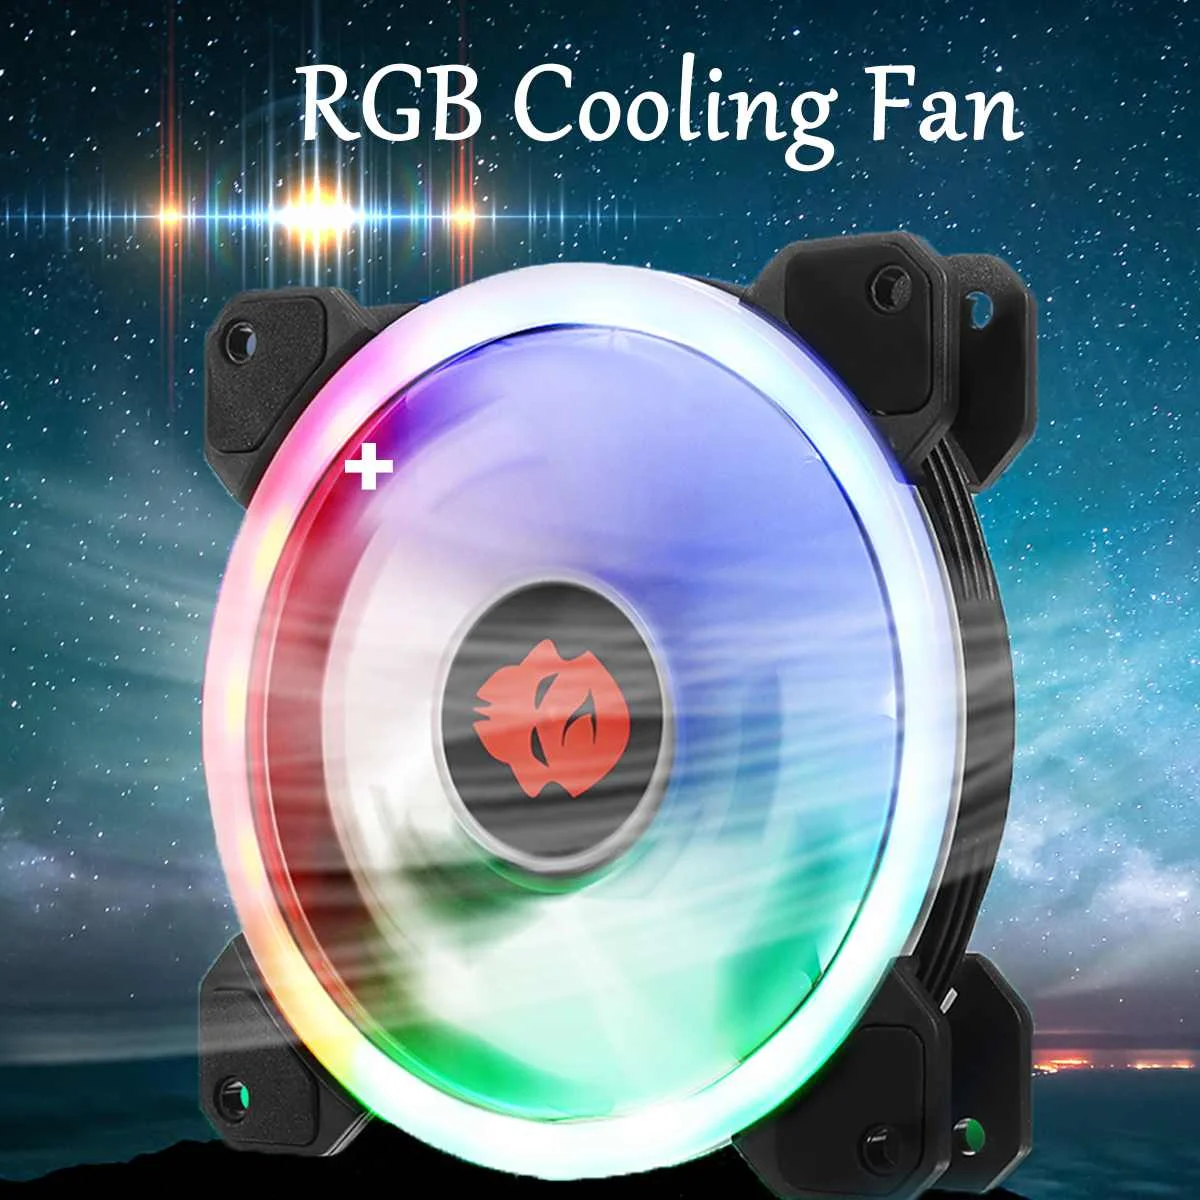 LEORY 1pc 120mm Computer Cooling Fan Cooler PC RGB Silent CPU Cooling Fans High Air Flow LED CPU Radiator Heatsink For PC Case